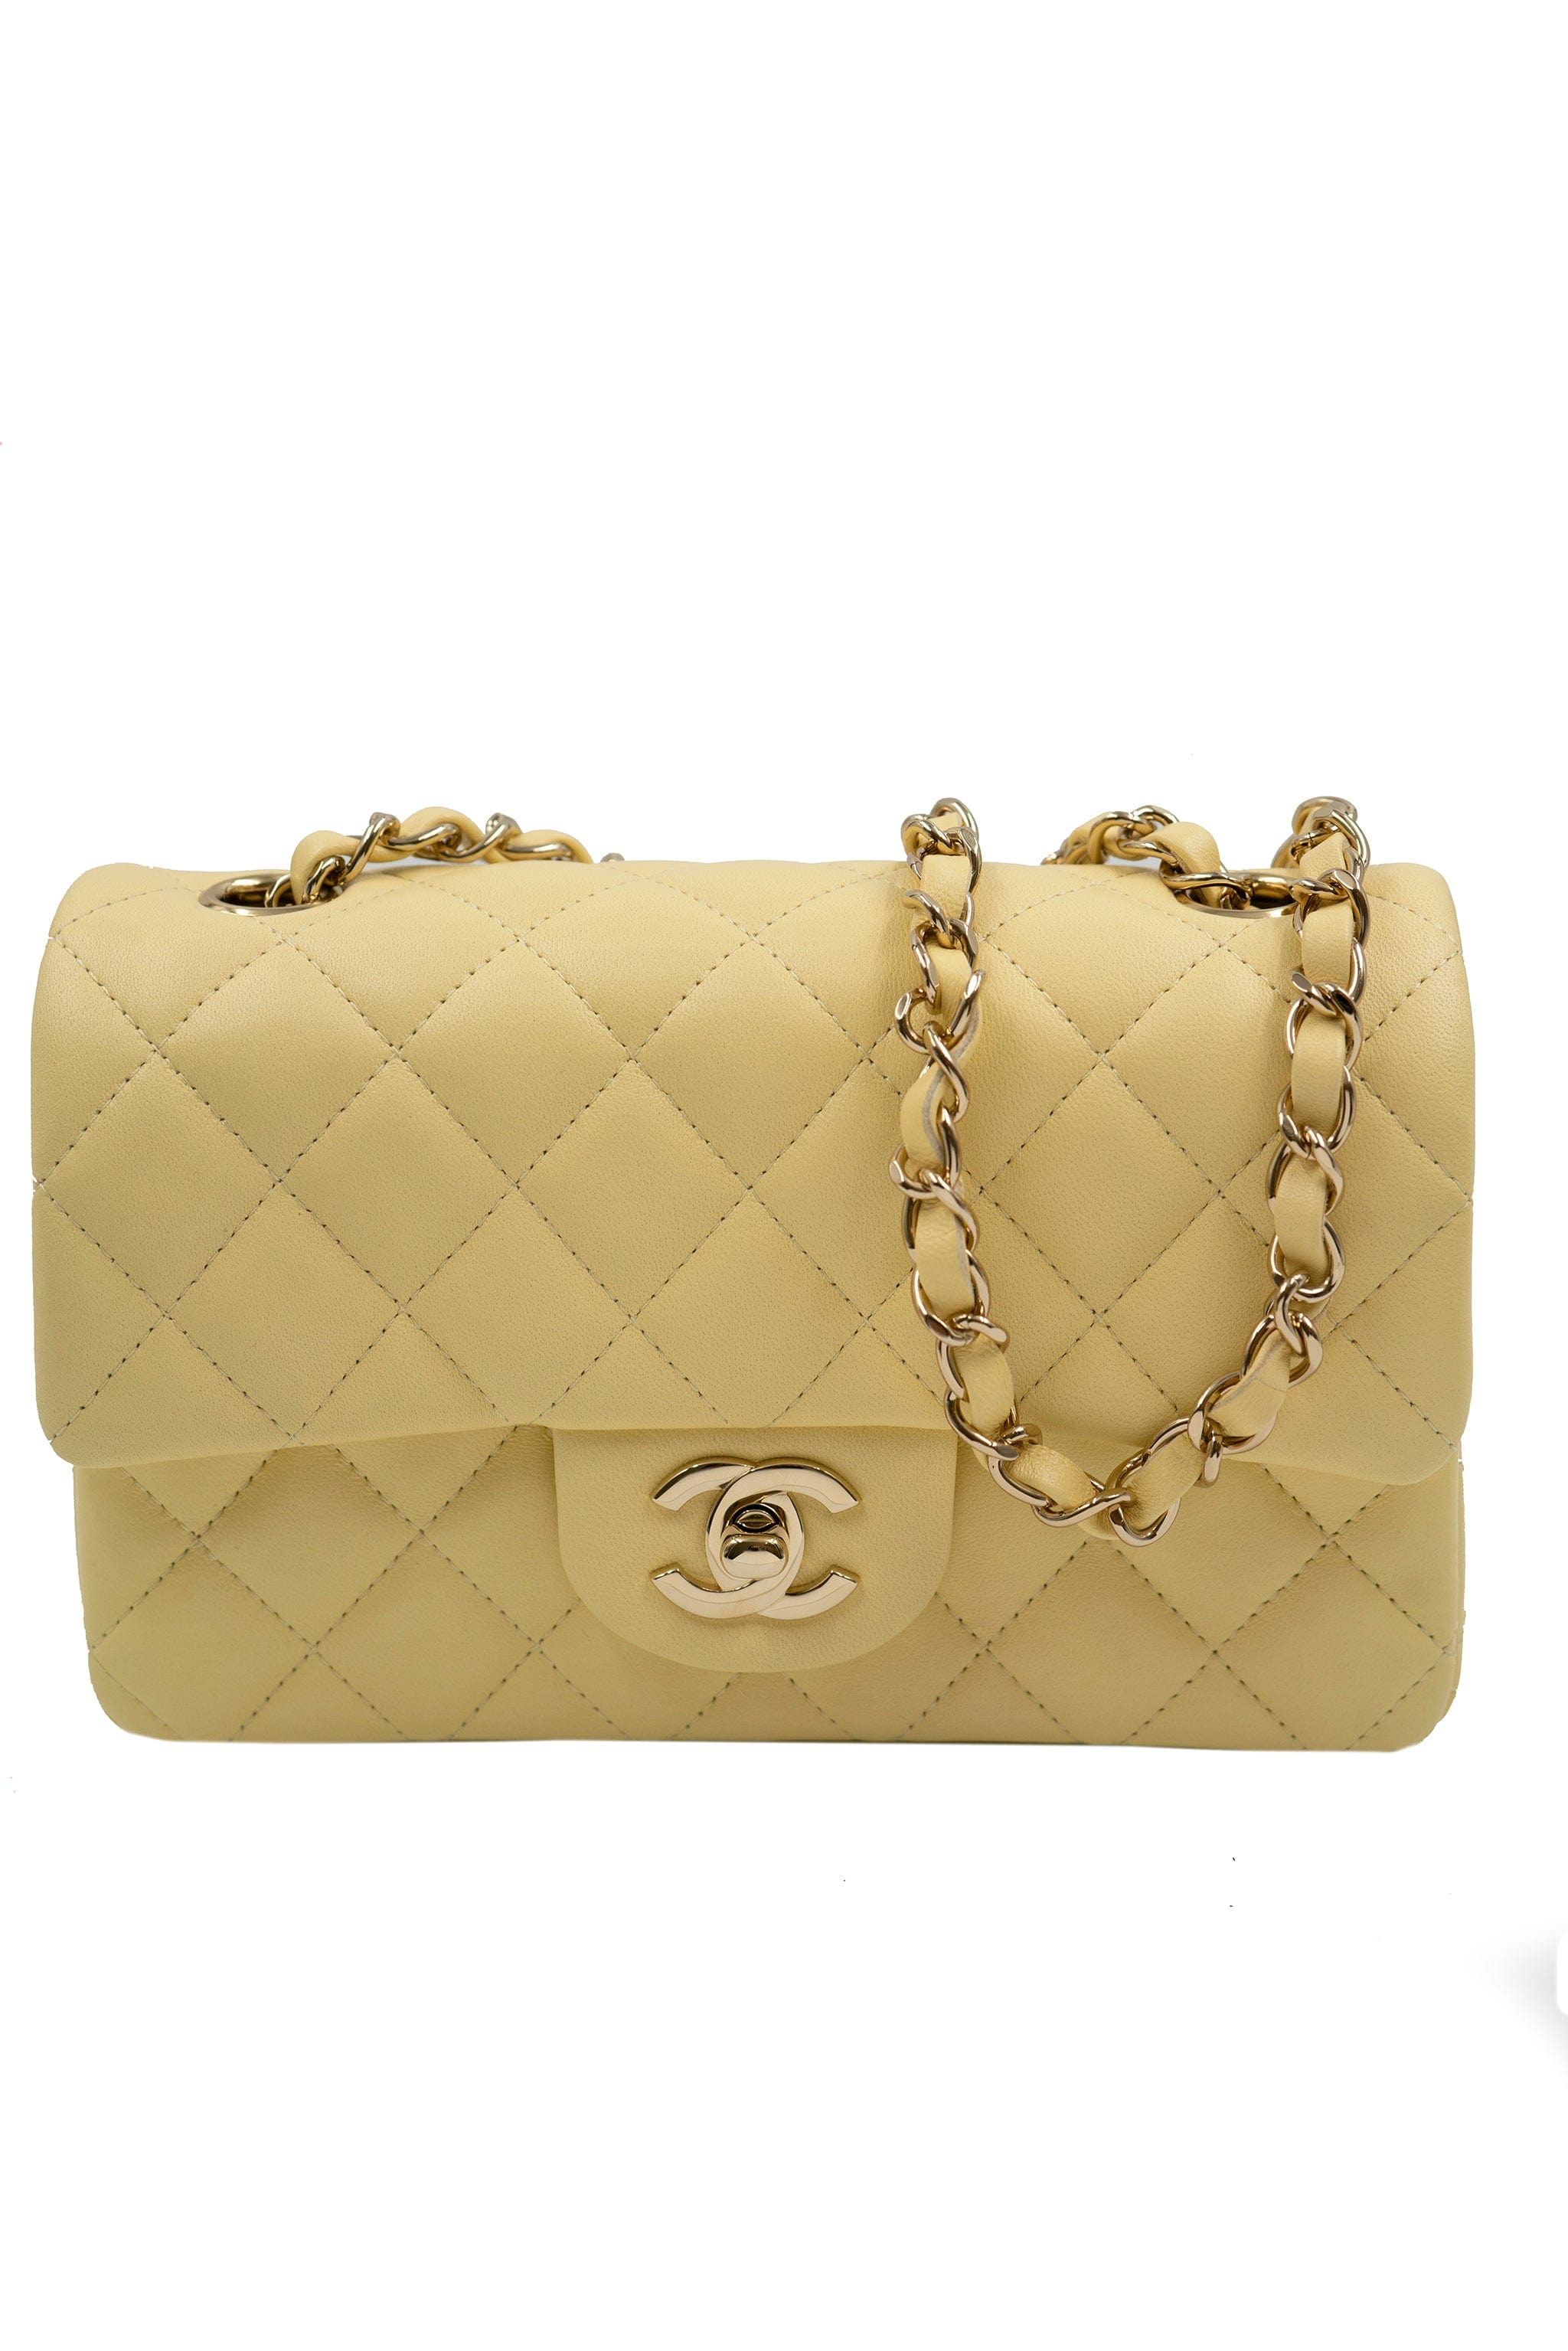 Chanel Pale Lemon Mini Classic Flap with GHW - ALL0158